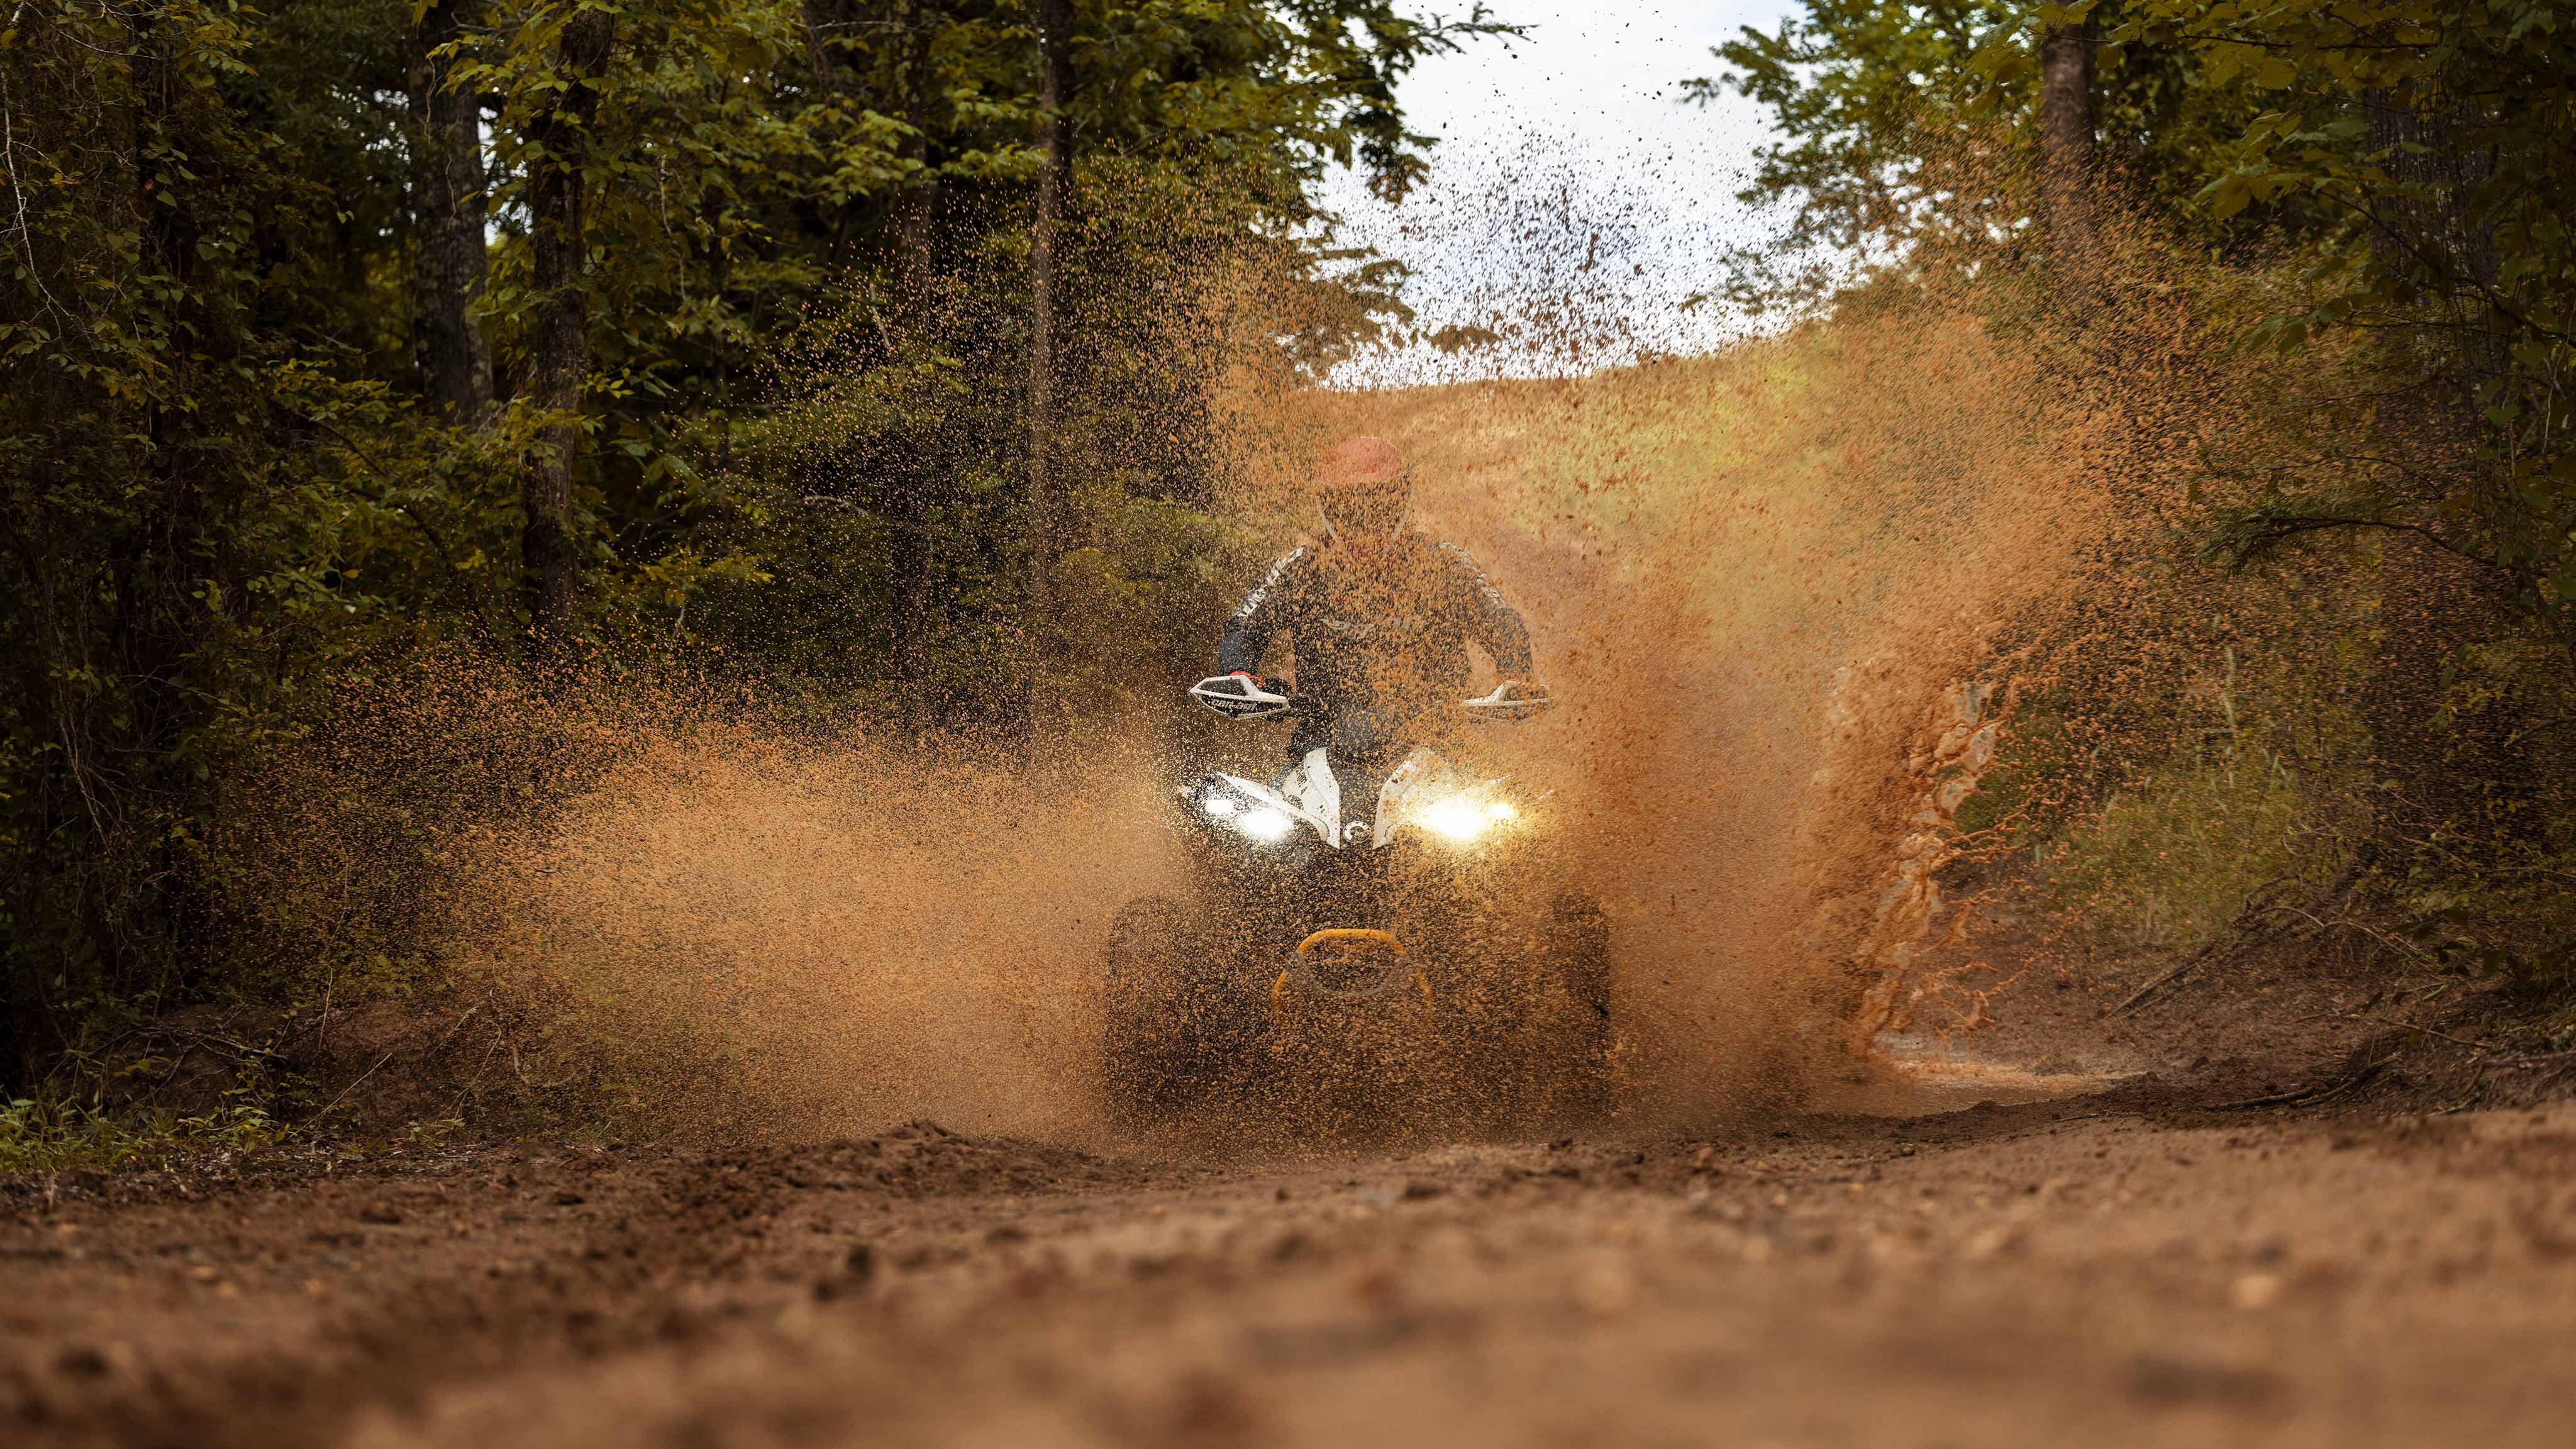 A Can-Am Renegade sends mud flying